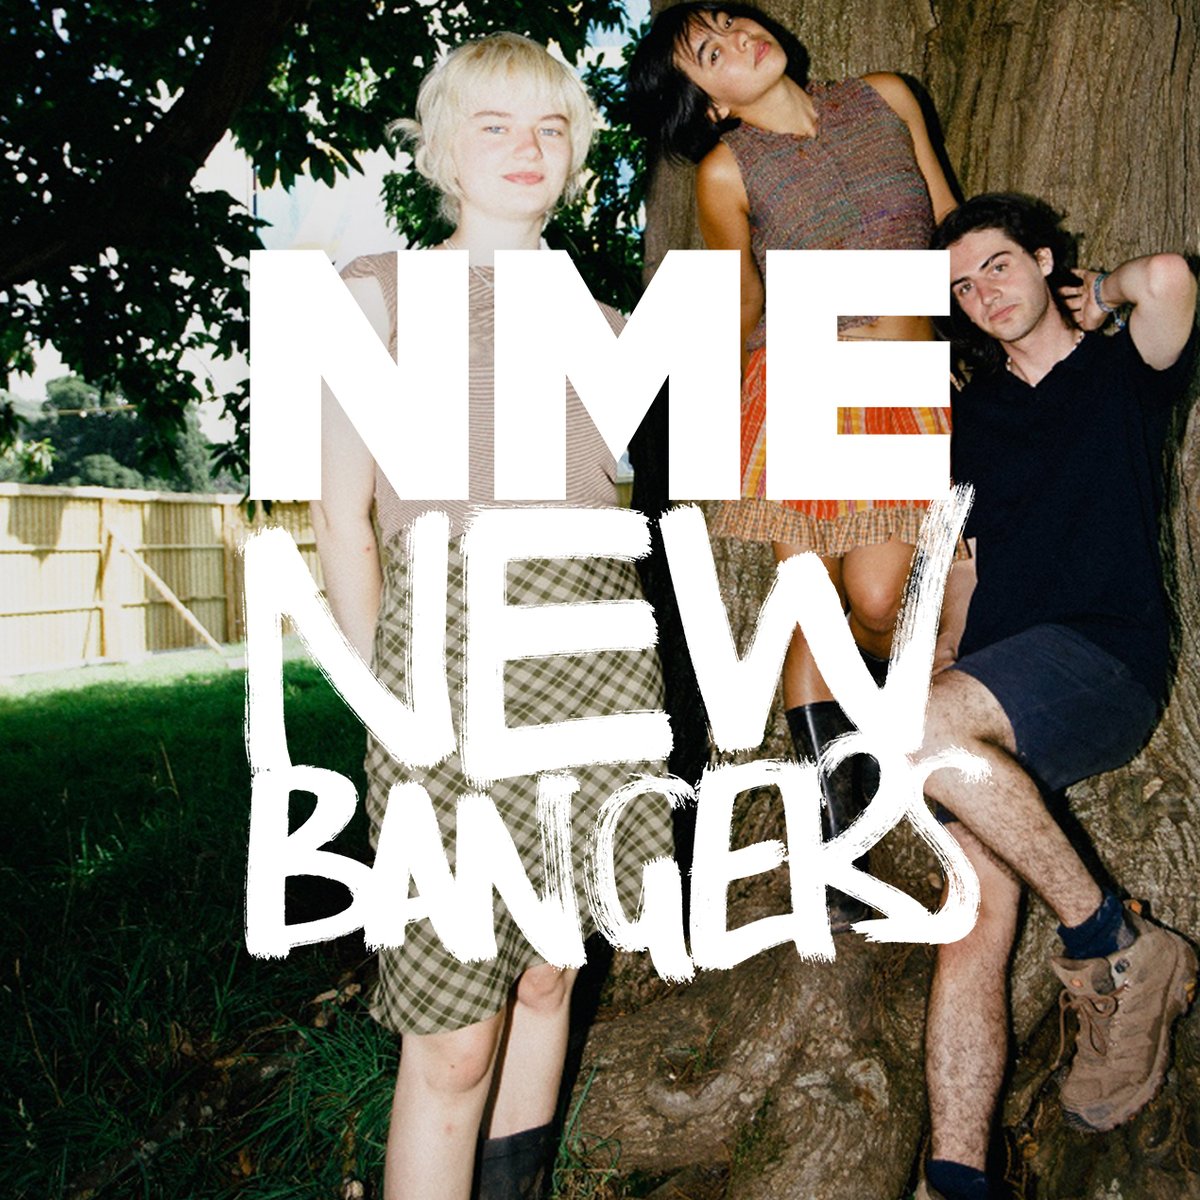 In this week's edition of NME's New Bangers, we are celebrating the artists set to take over 2024, including... @mitjunkyard @BCMBband @Saynow @fredroberts55 @ALTBLKERA @lipcritic & more! Spotify: open.spotify.com/playlist/0xXZW… Apple Music: music.apple.com/us/playlist/nm…